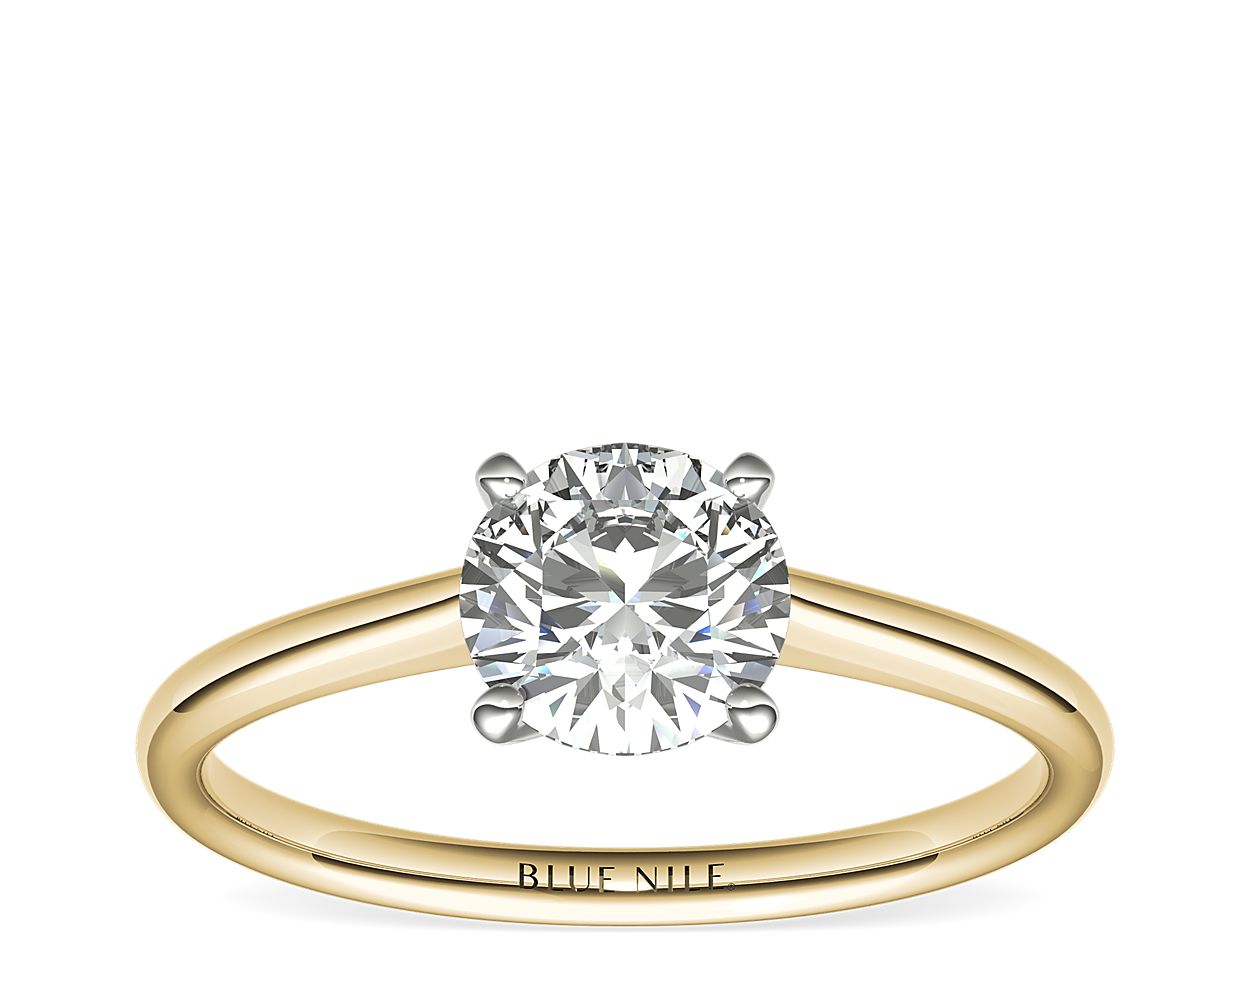 Petite Solitaire Engagement Ring in 14k Yellow Gold 1.00 Carat E-VS1 Excellent Cut Round Diamond